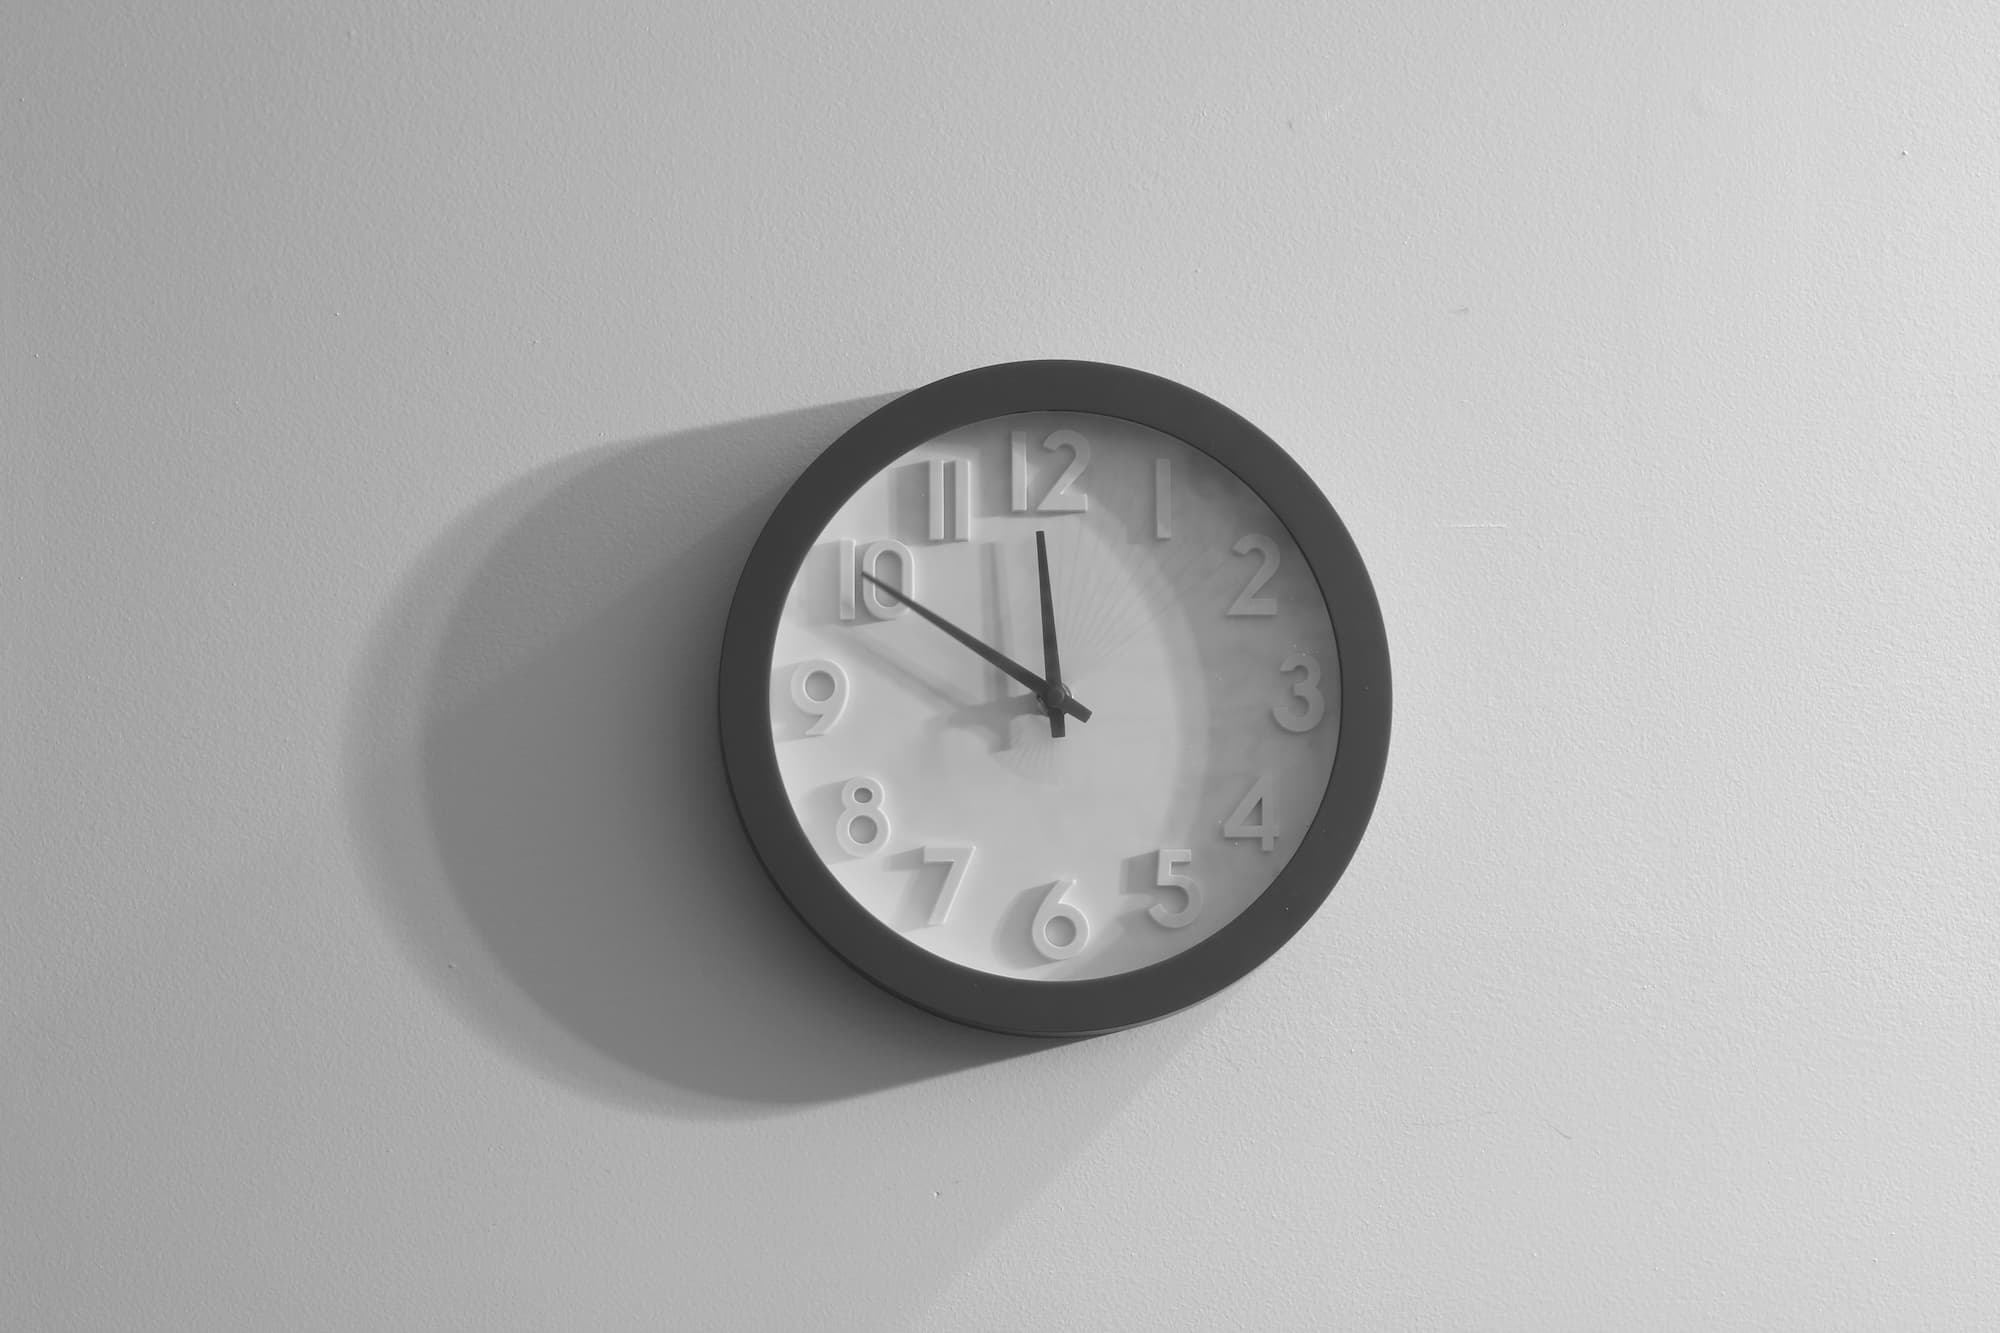 A white wall with a black and white analog wall clock mounted on it.